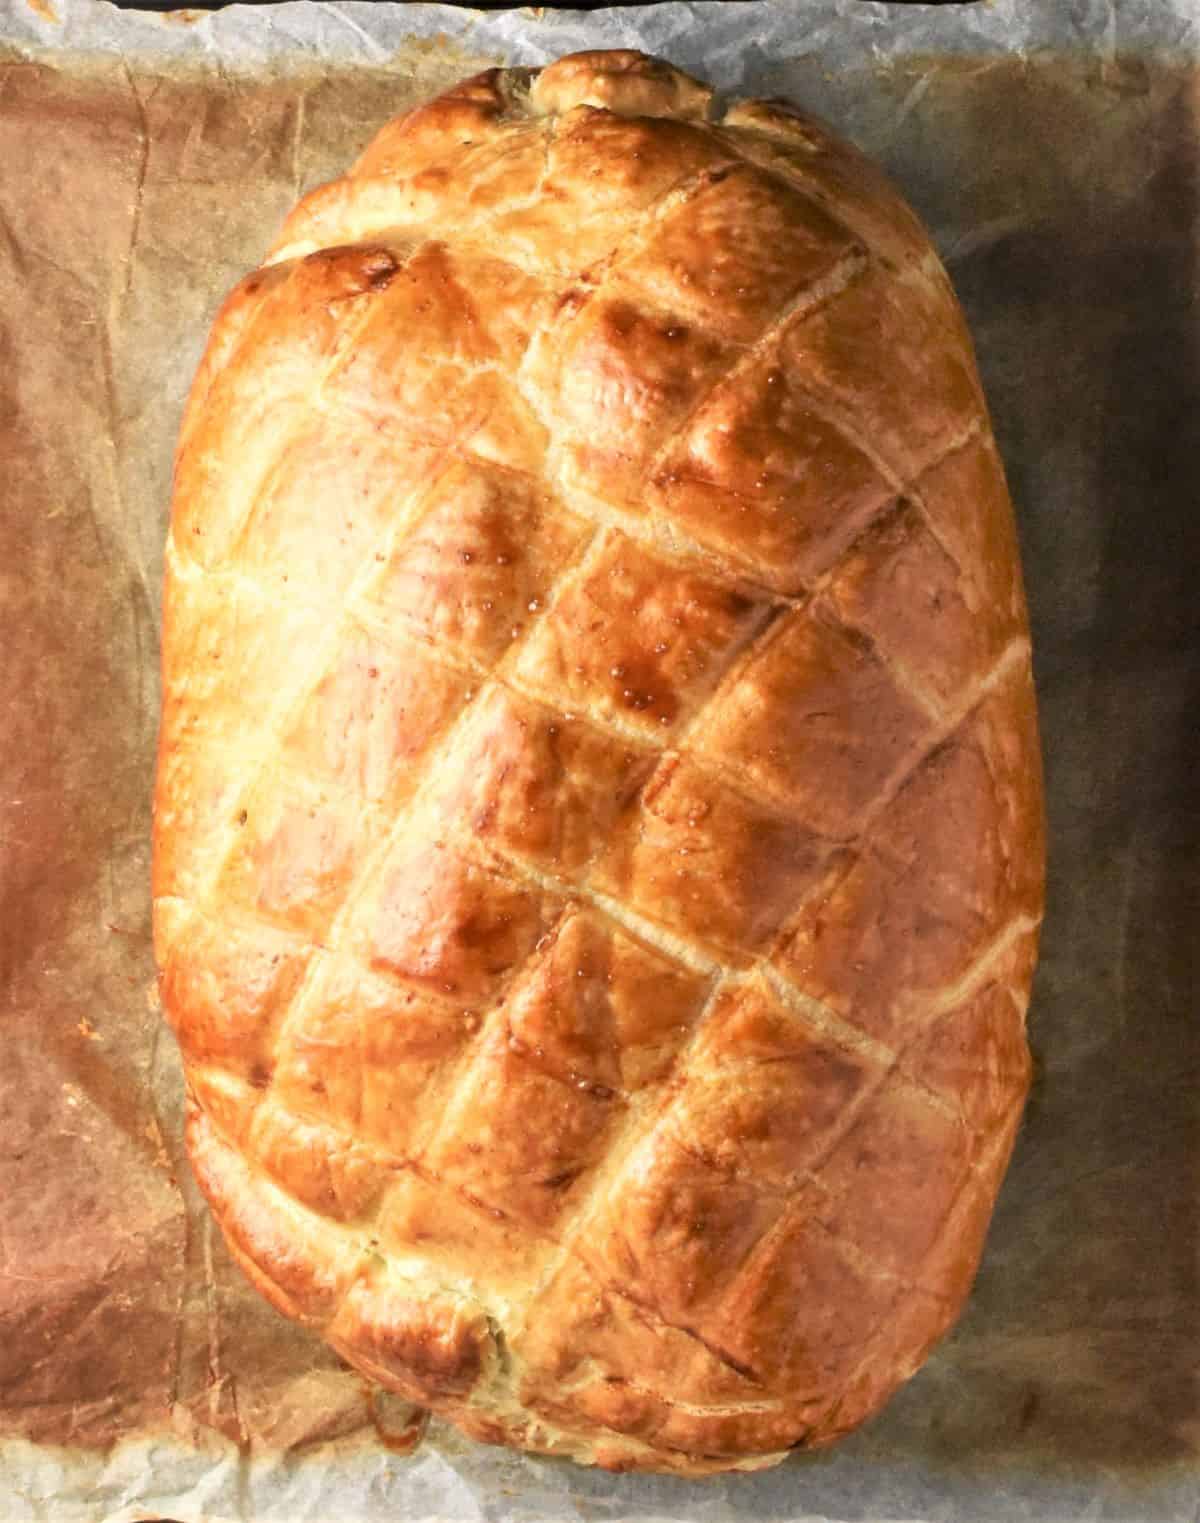 Top down view of baked turkey wellington.